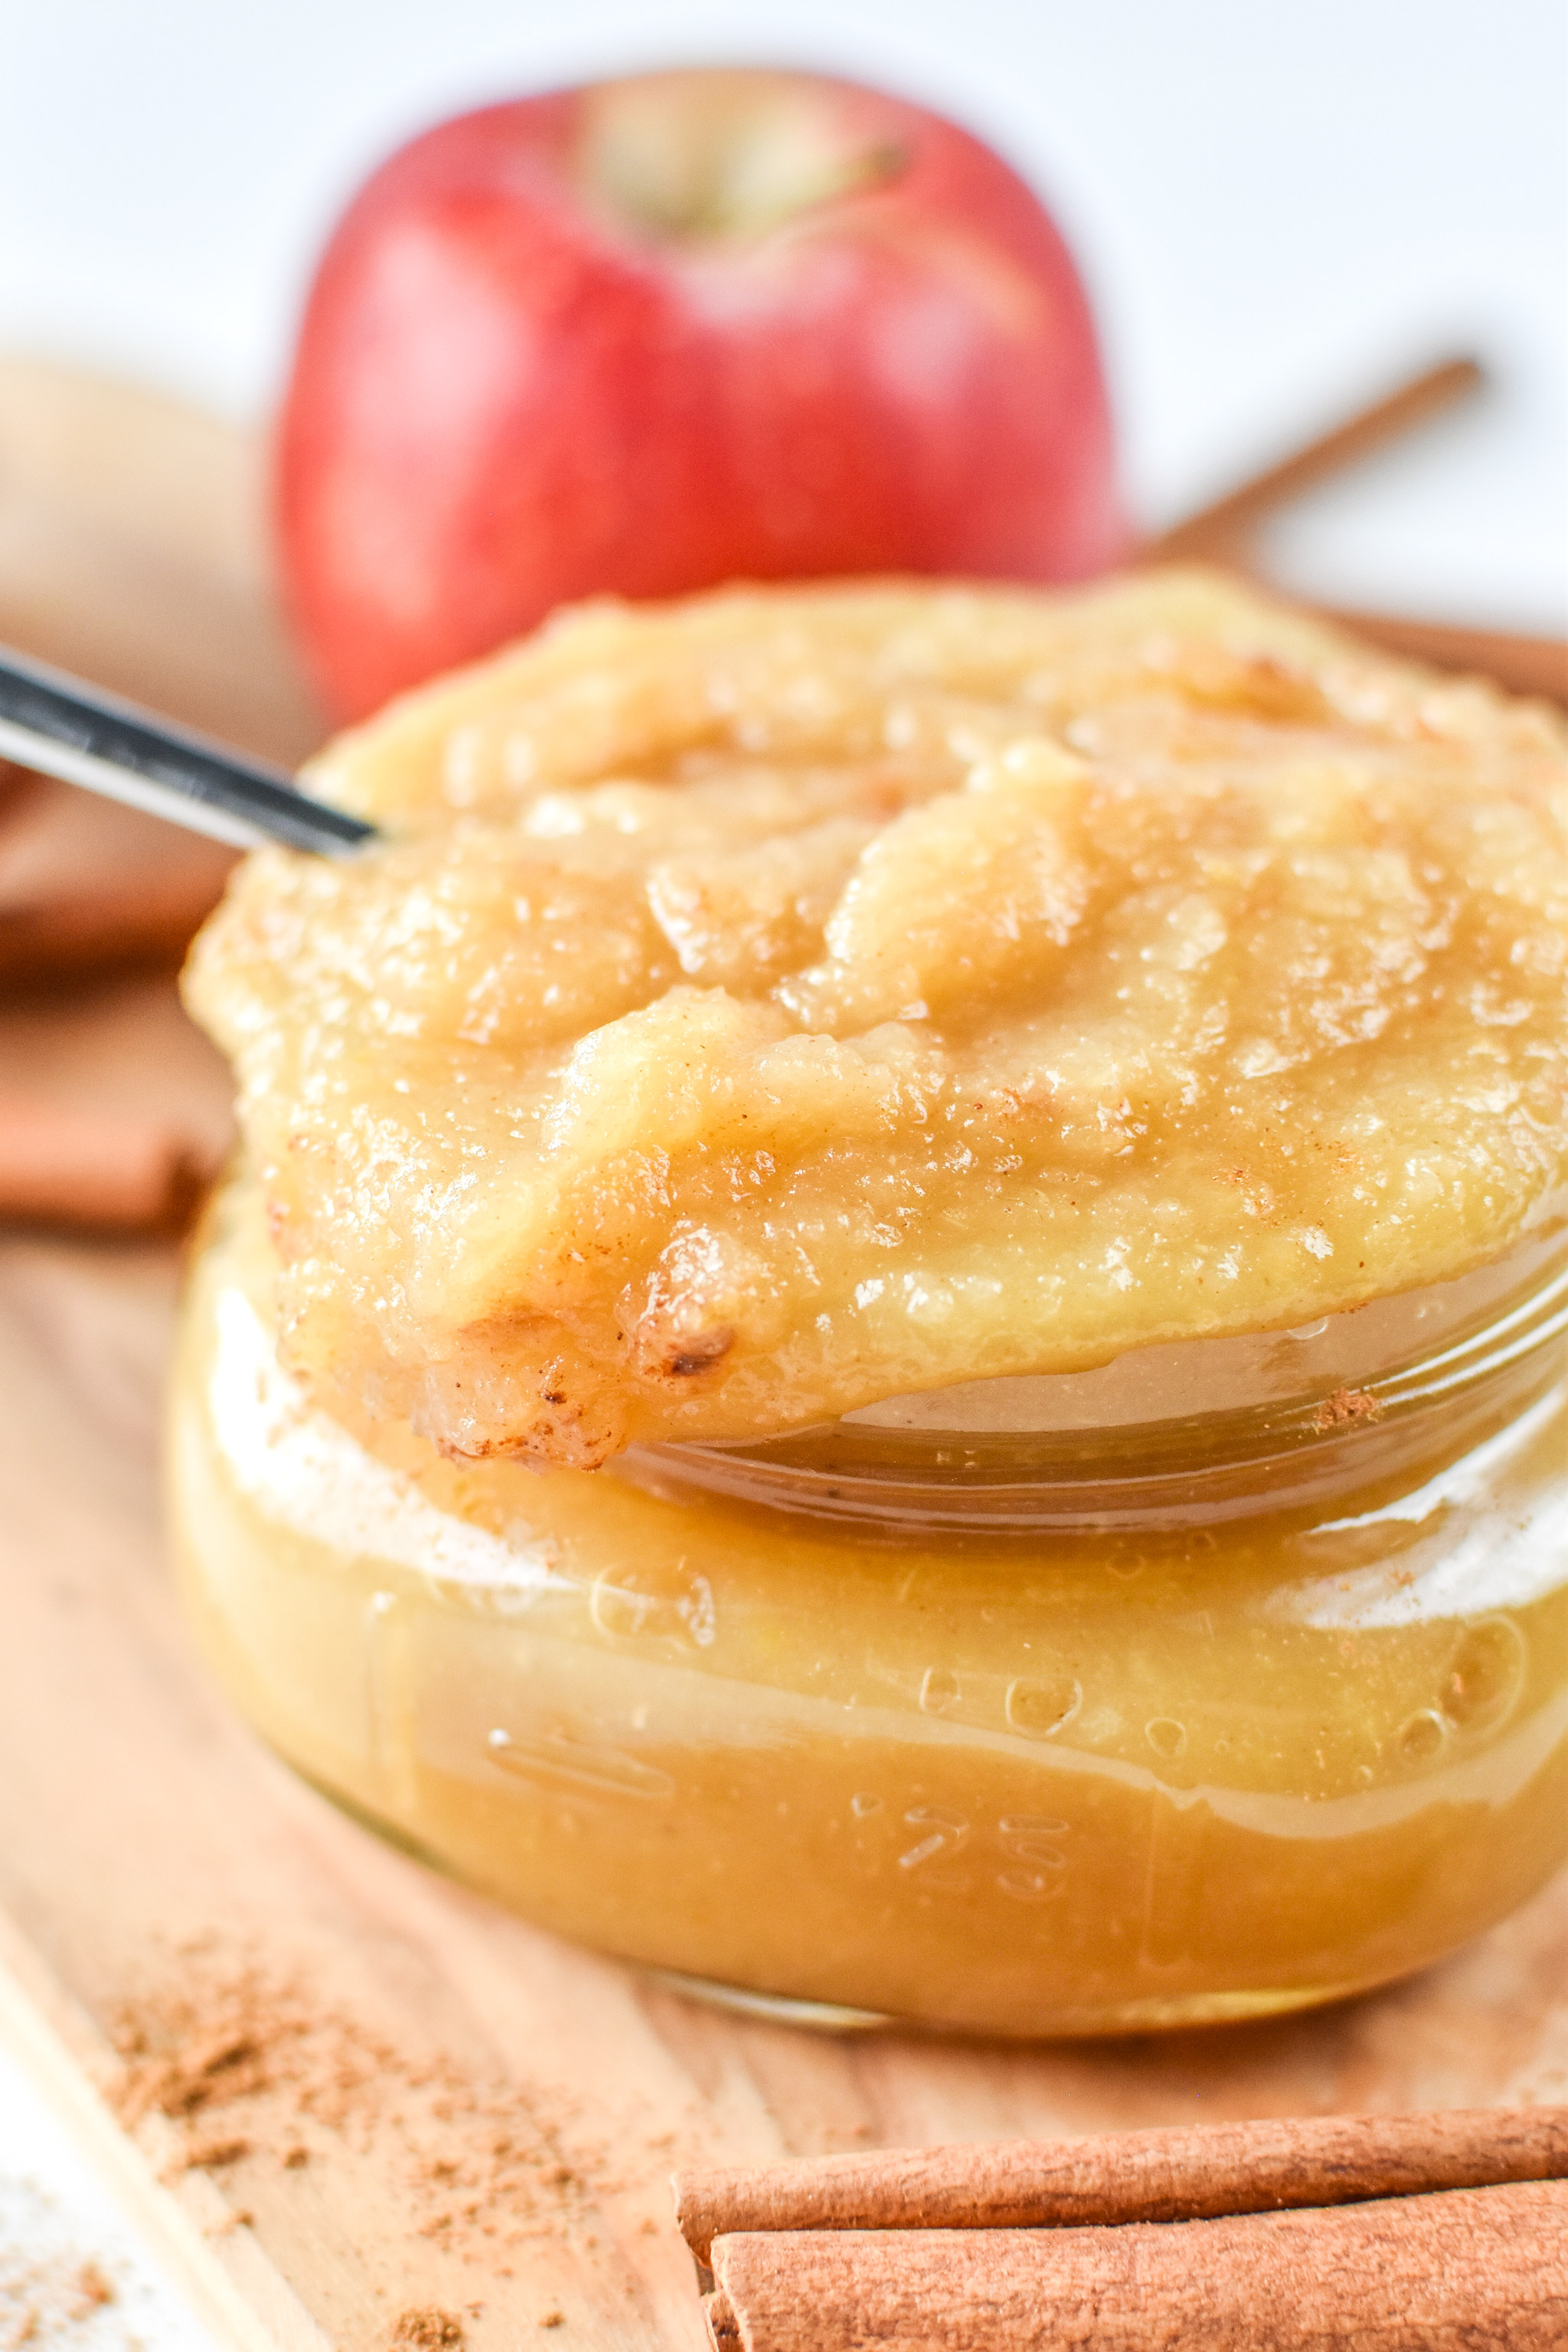 Store bought vs Homemade Applesauce: Which is cheaper?